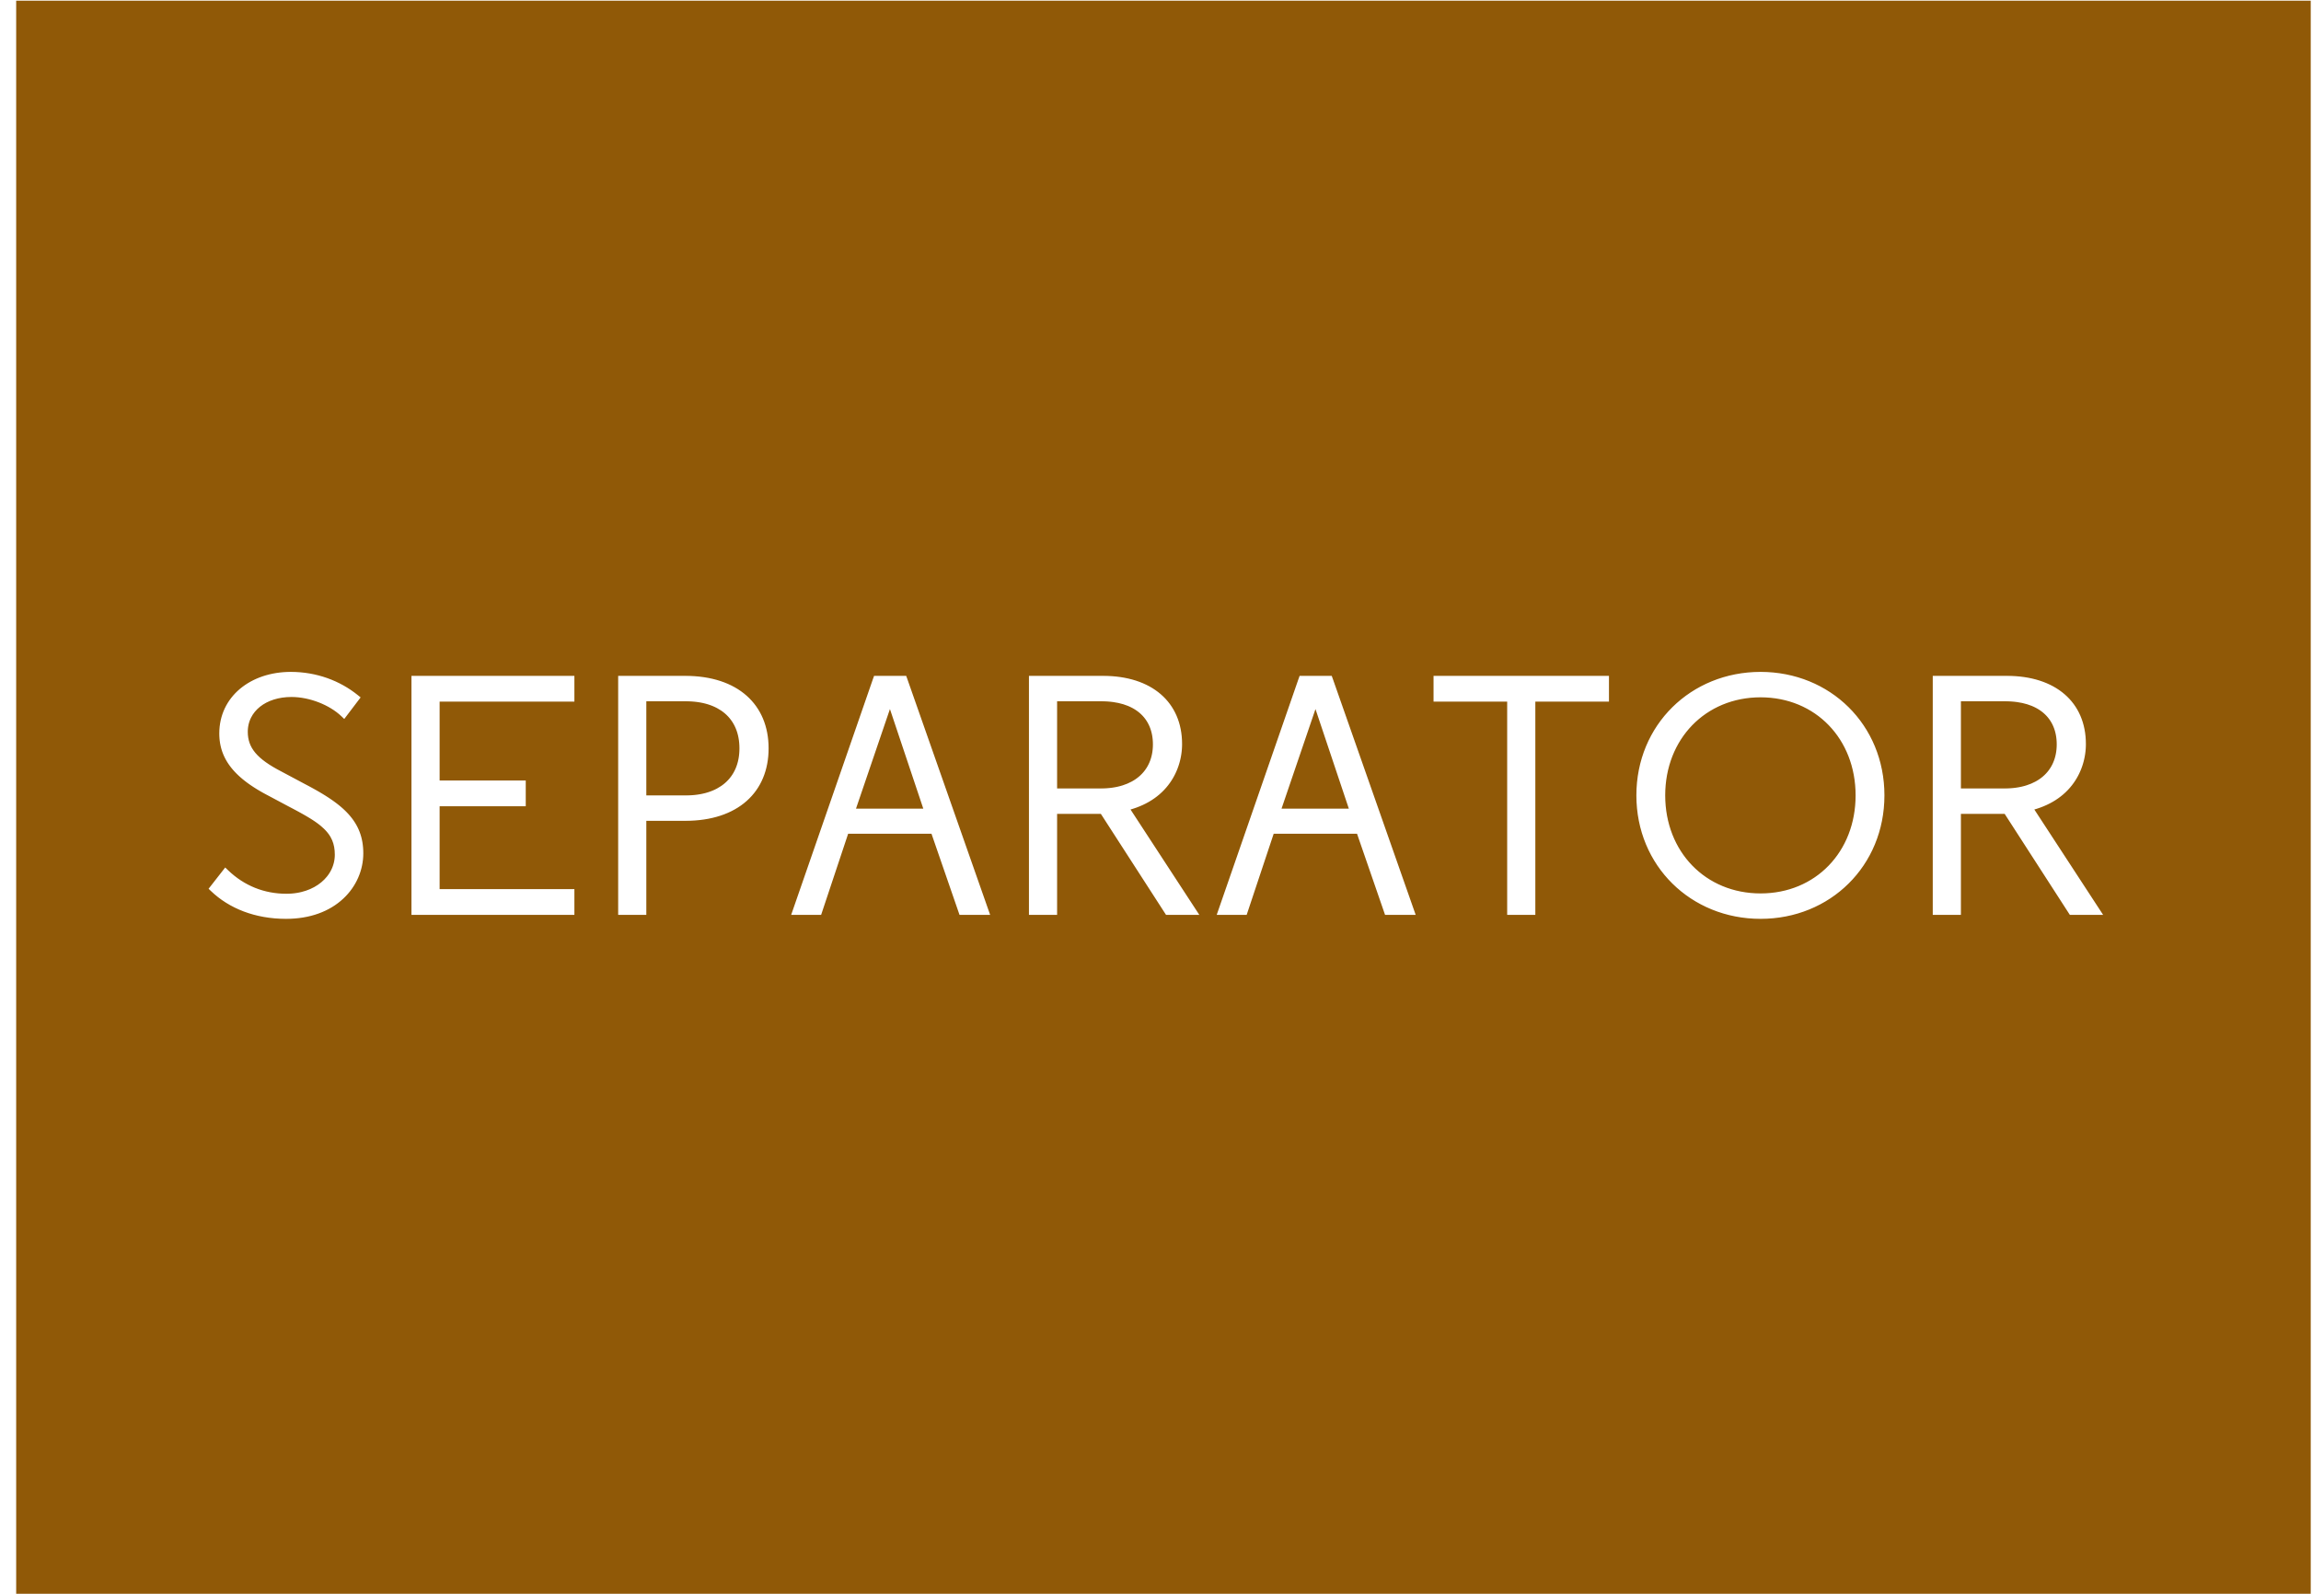 [separator] Tell the Marketing Labs team what you think